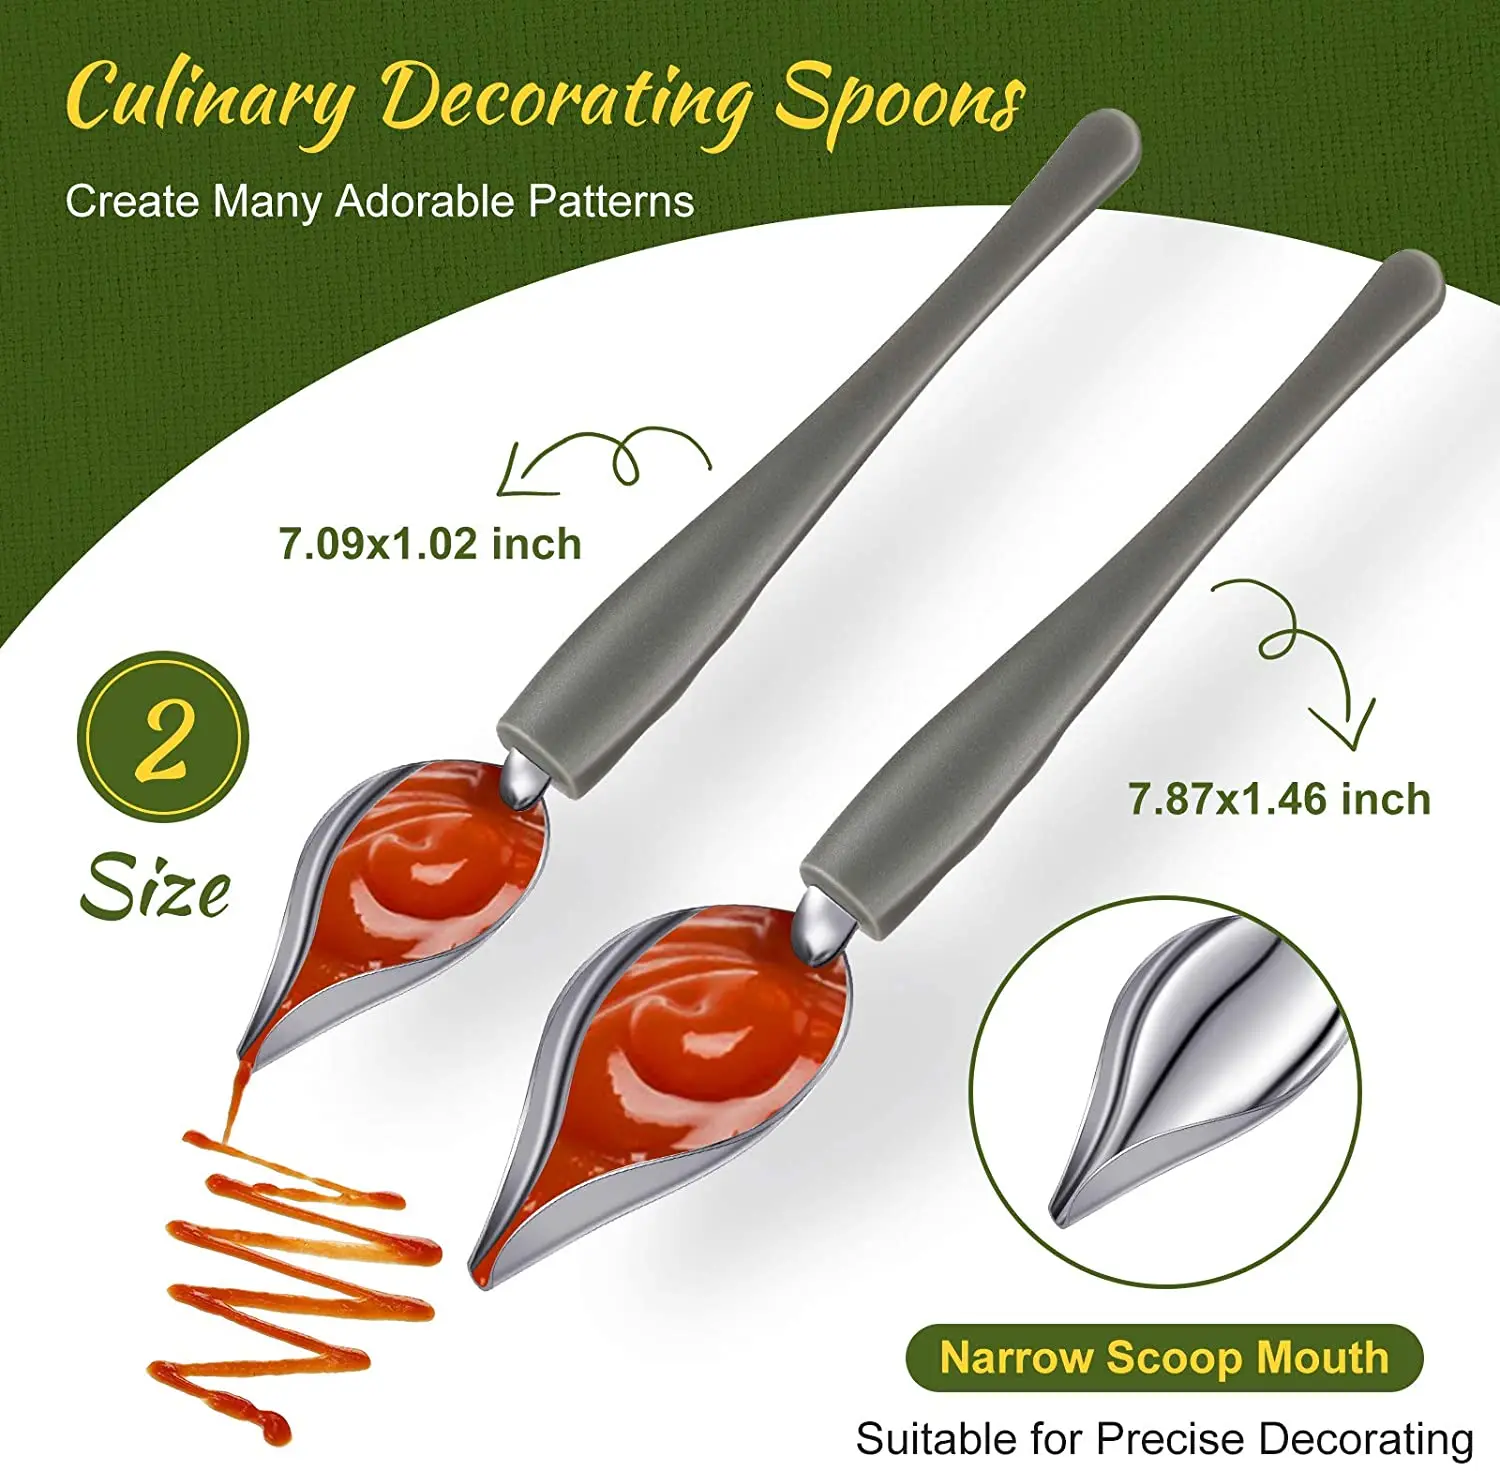 

3 Pieces Candy Dipping Tools Chocolate Dipping Fork Spoons Set 2 Culinary Chef Art Pencil For Decorative Plates Stainless Steel